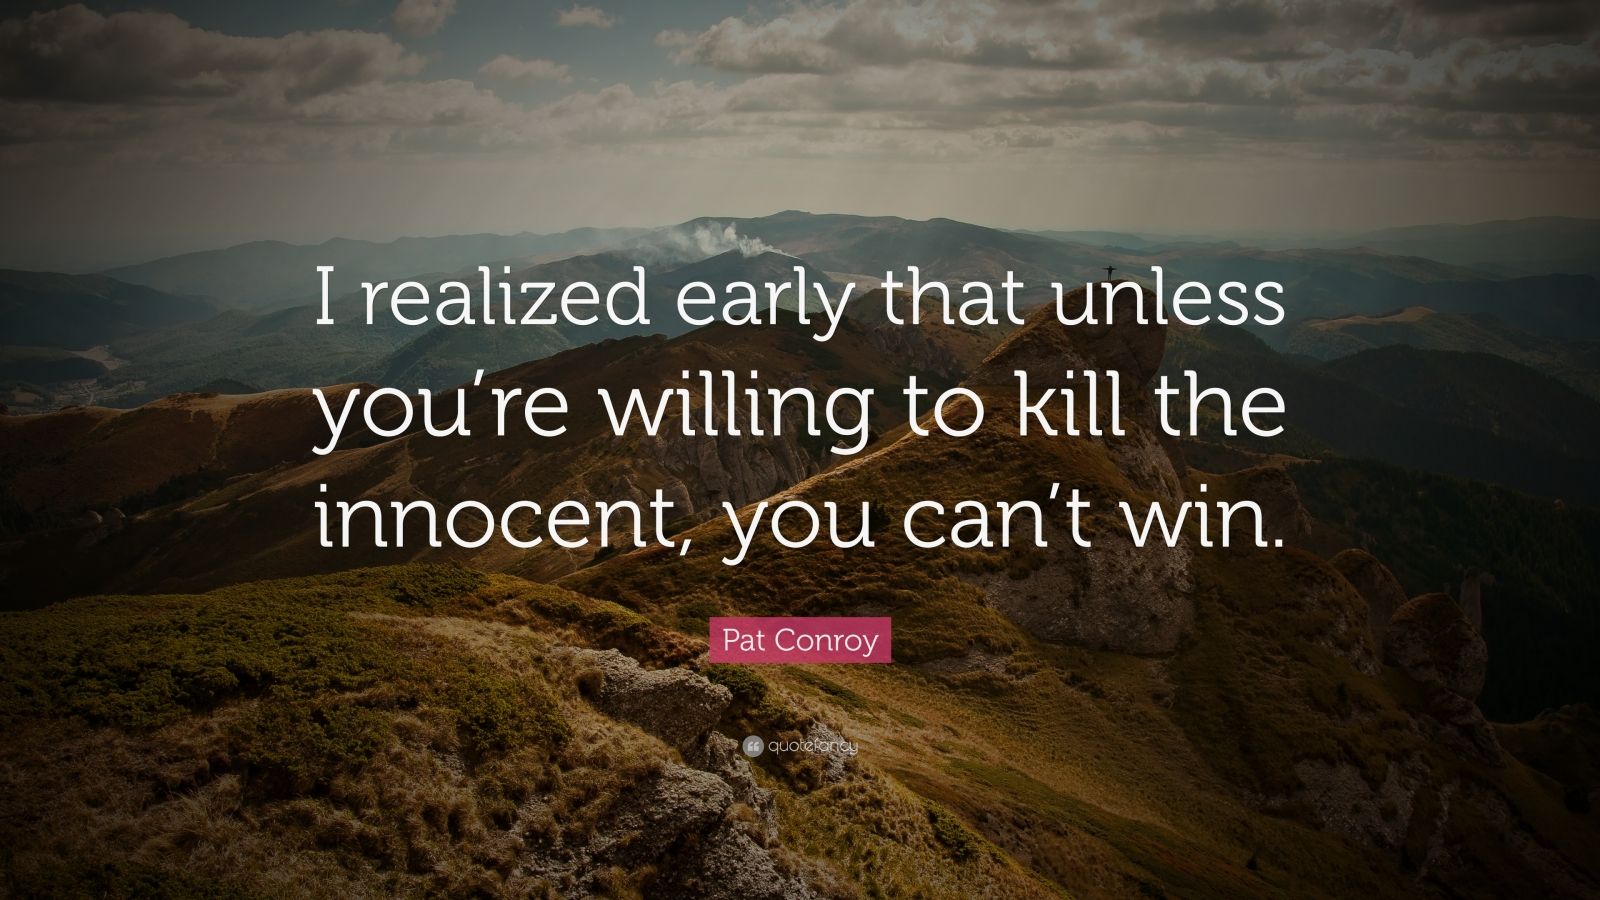 Pat Conroy Quote: “I realized early that unless you’re willing to kill ...